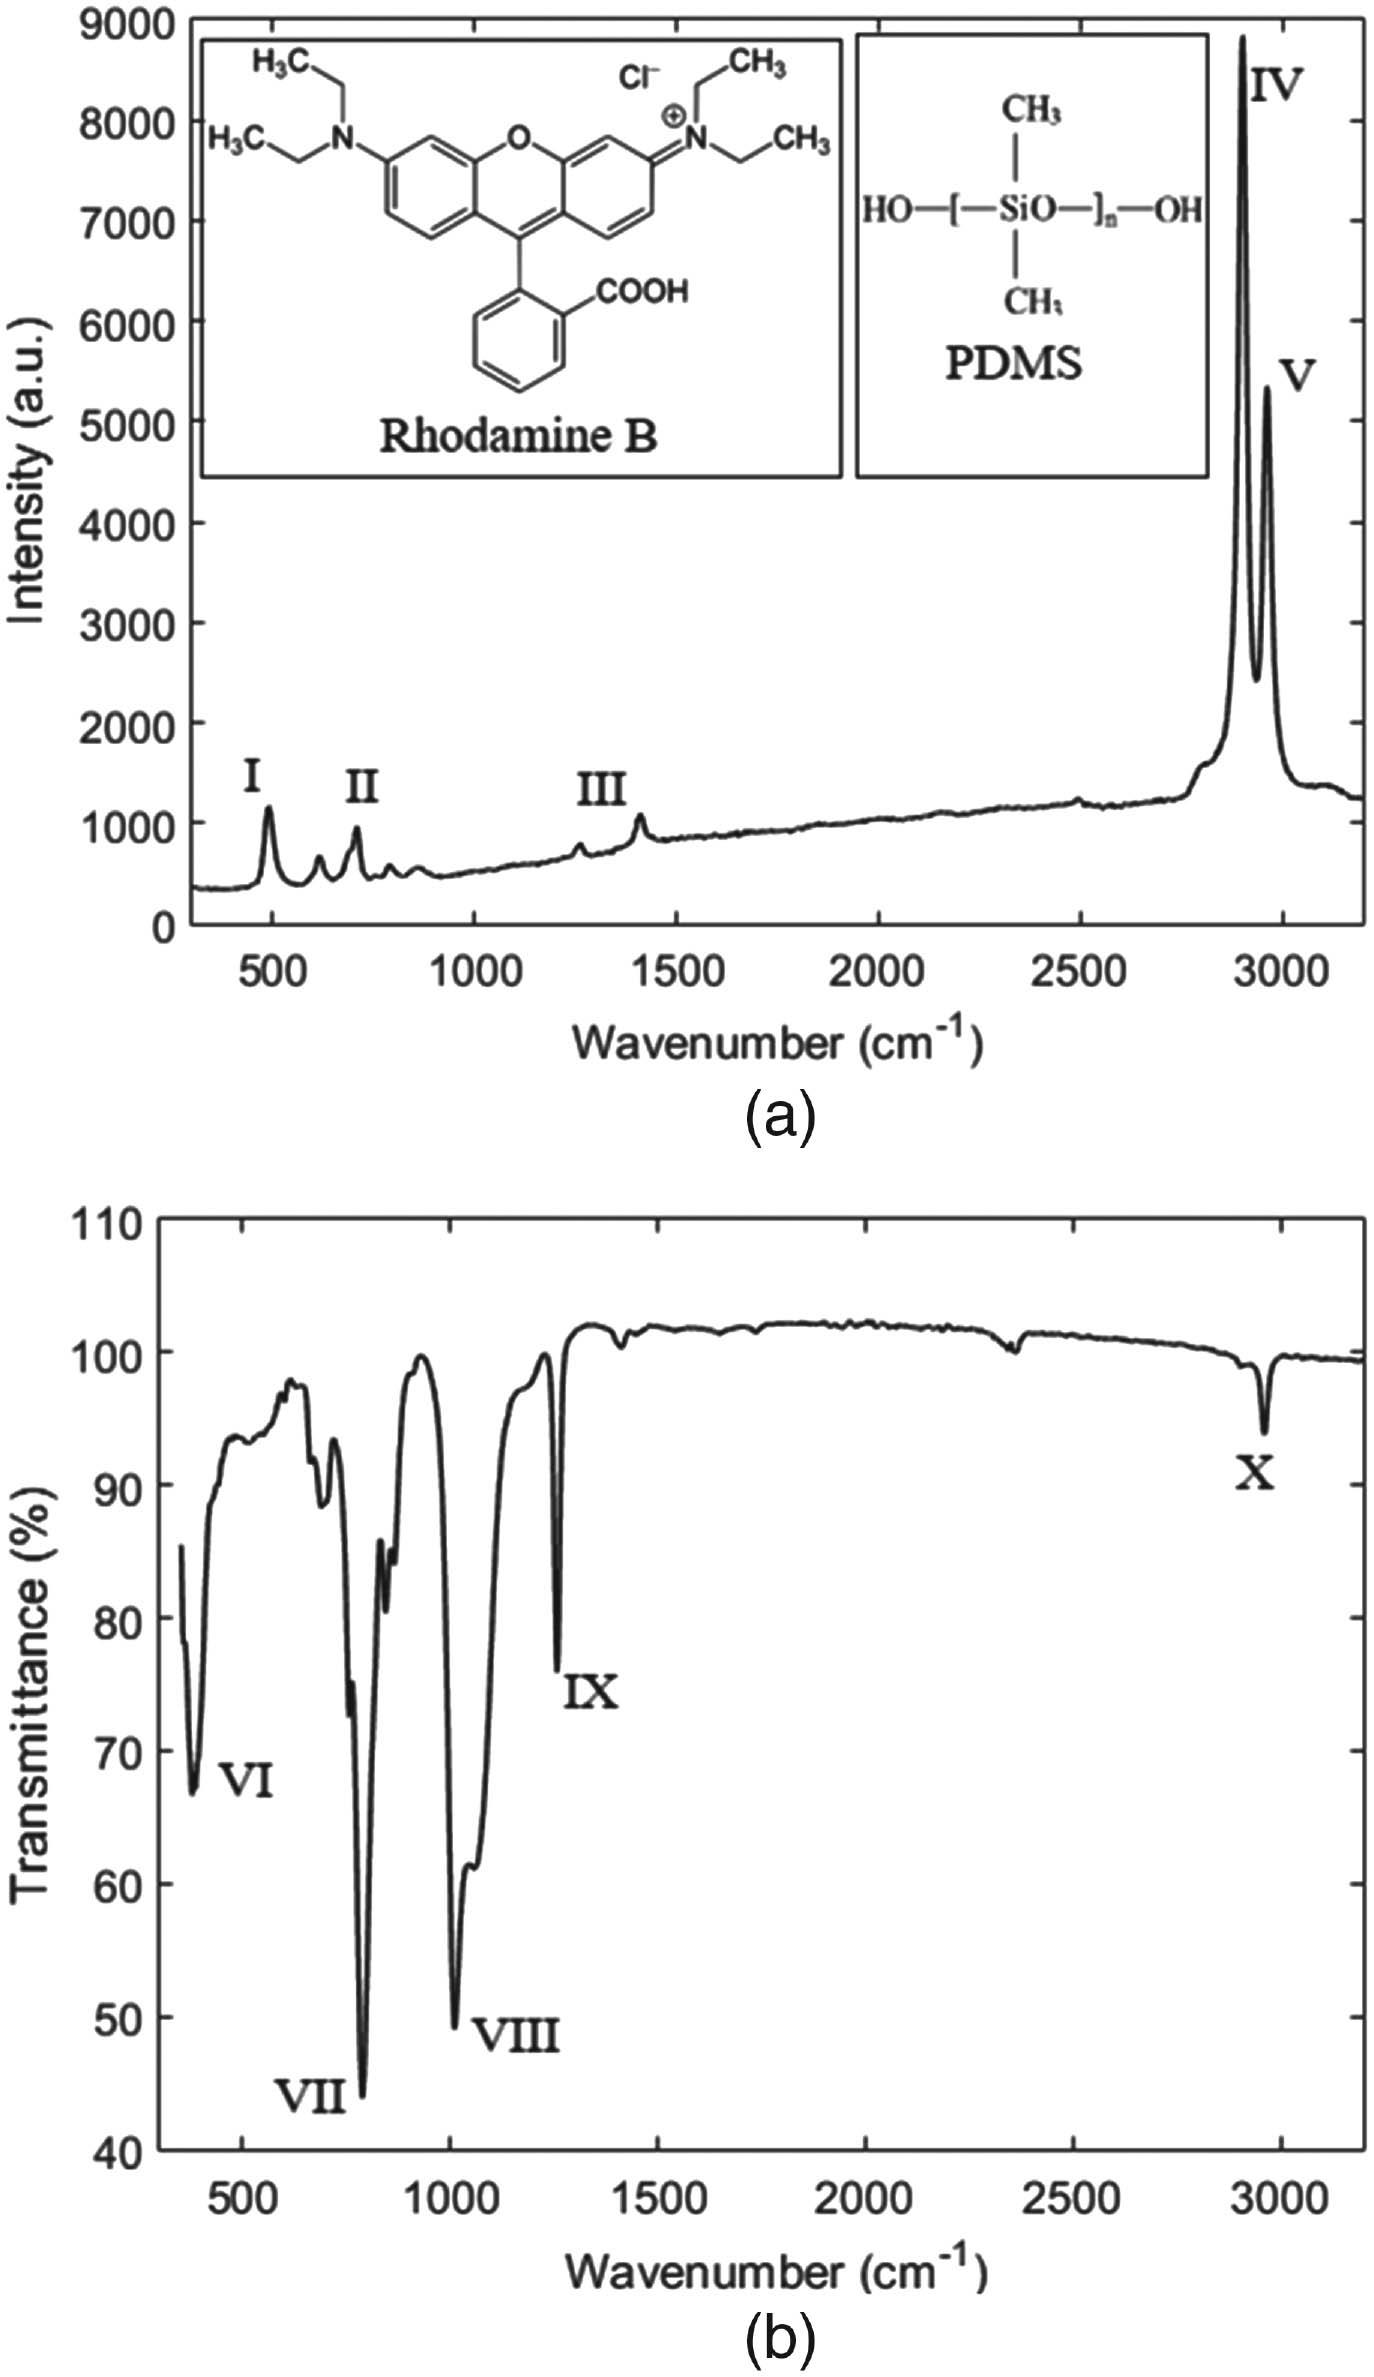 (a) Raman and (b) infrared spectra of the dye-doped PDMS optical fiber. Figure inset shows the molecular structures of PDMS and rhodamine B.